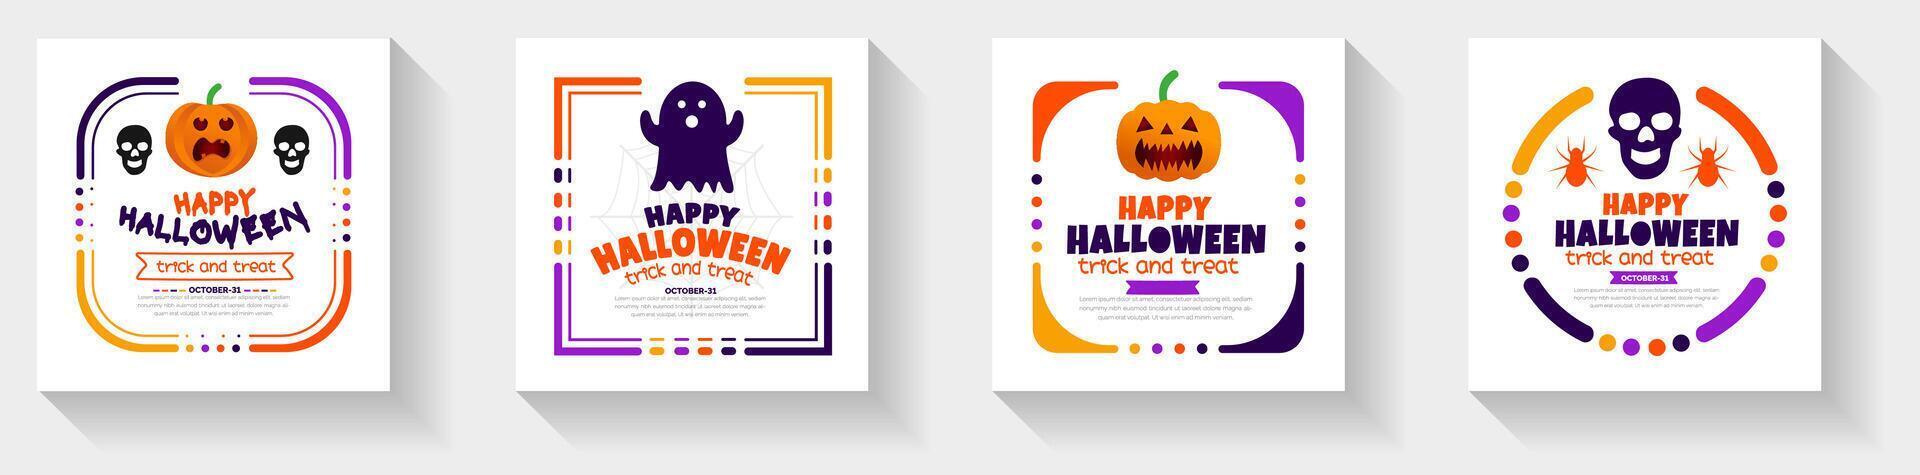 31 October happy Halloween social media post banner design template set with pumpkins and boo. use to background, banner, placard, party invitation card, book cover and poster design. vector